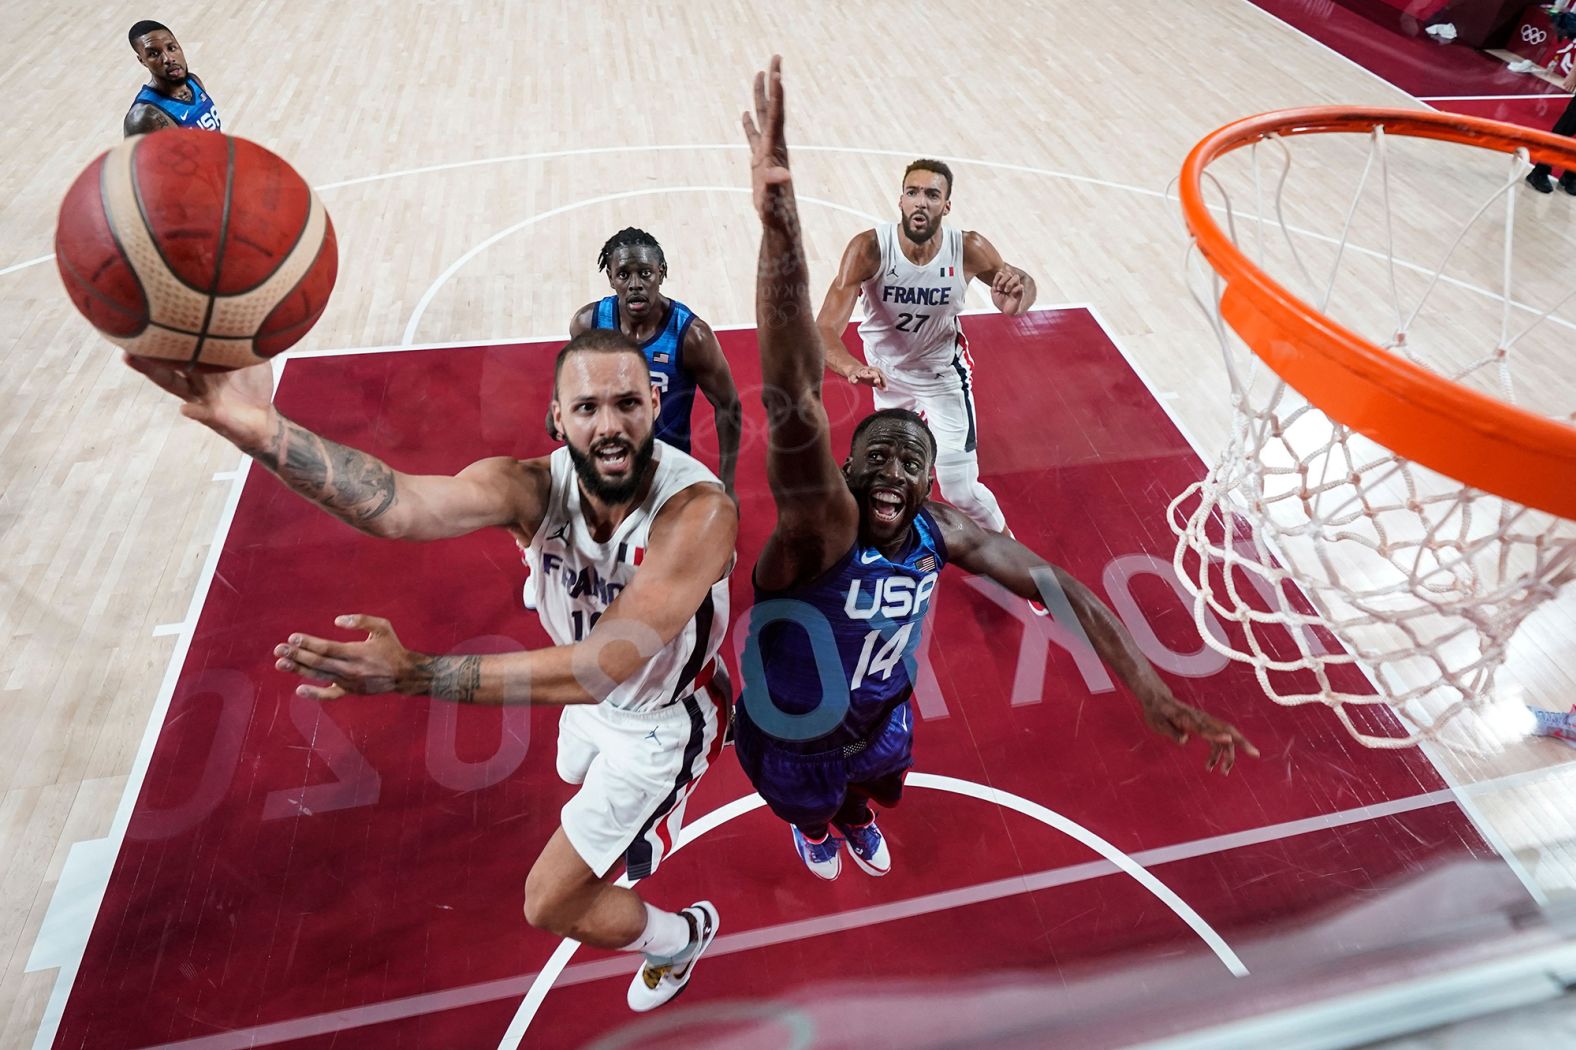 The Tokyo 2020 logo is reflected in the backboard as France's Evan Fournier rises for a shot on July 25. <a href="index.php?page=&url=https%3A%2F%2Fwww.cnn.com%2Fworld%2Flive-news%2Ftokyo-2020-olympics-07-25-21-spt%2Fh_a157087079778afeb7aea72e8d599708" target="_blank">France upset the United States</a> 83-76 in what was both teams' opening games. The US team hadn't lost an Olympic game since 2004.